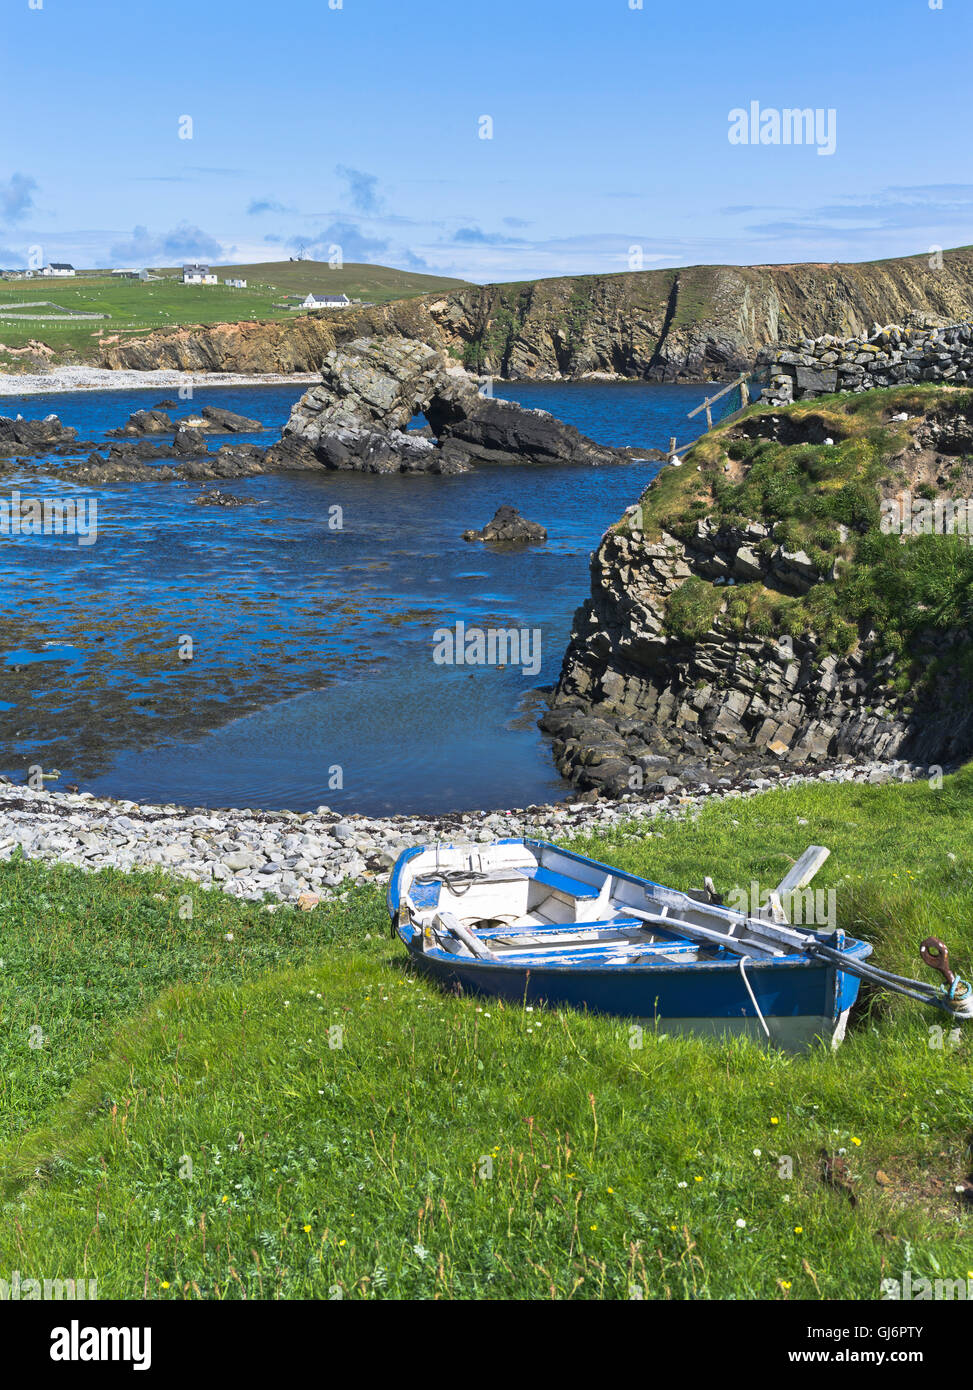 dh South Harbour FAIR ISLE SHETLAND Beached Boat in noost above bay sea arch beach rocky beach scotland isles grounded fish Stock Photo